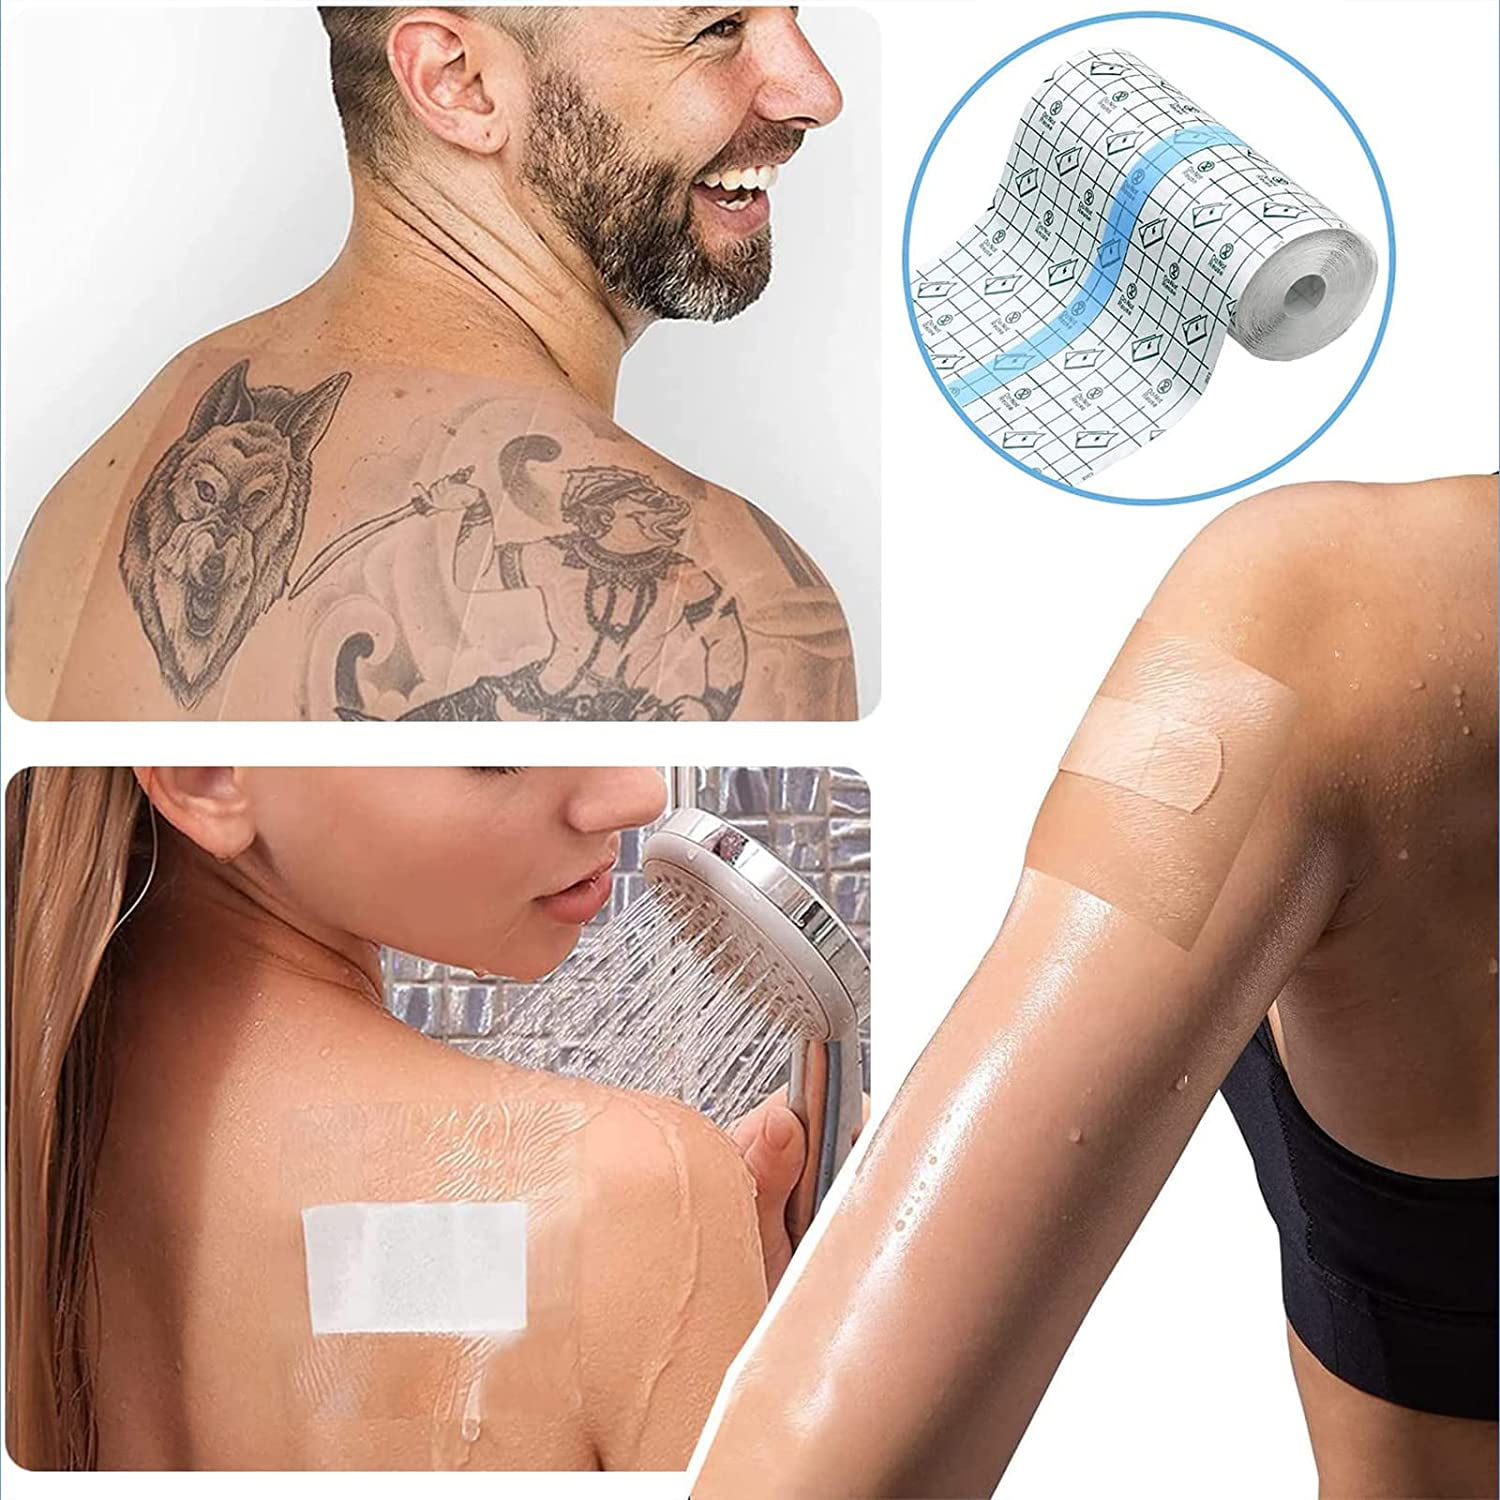 Tattoo Aftercare Waterproof Bandage 10cm x 2m,Transparent Film Dressing，Second Skin Healing Protective Clear Adhesive Bandages for Tattoo Aftercare,Recovery,Plastic Cover,Protective Shield - Walmart.com